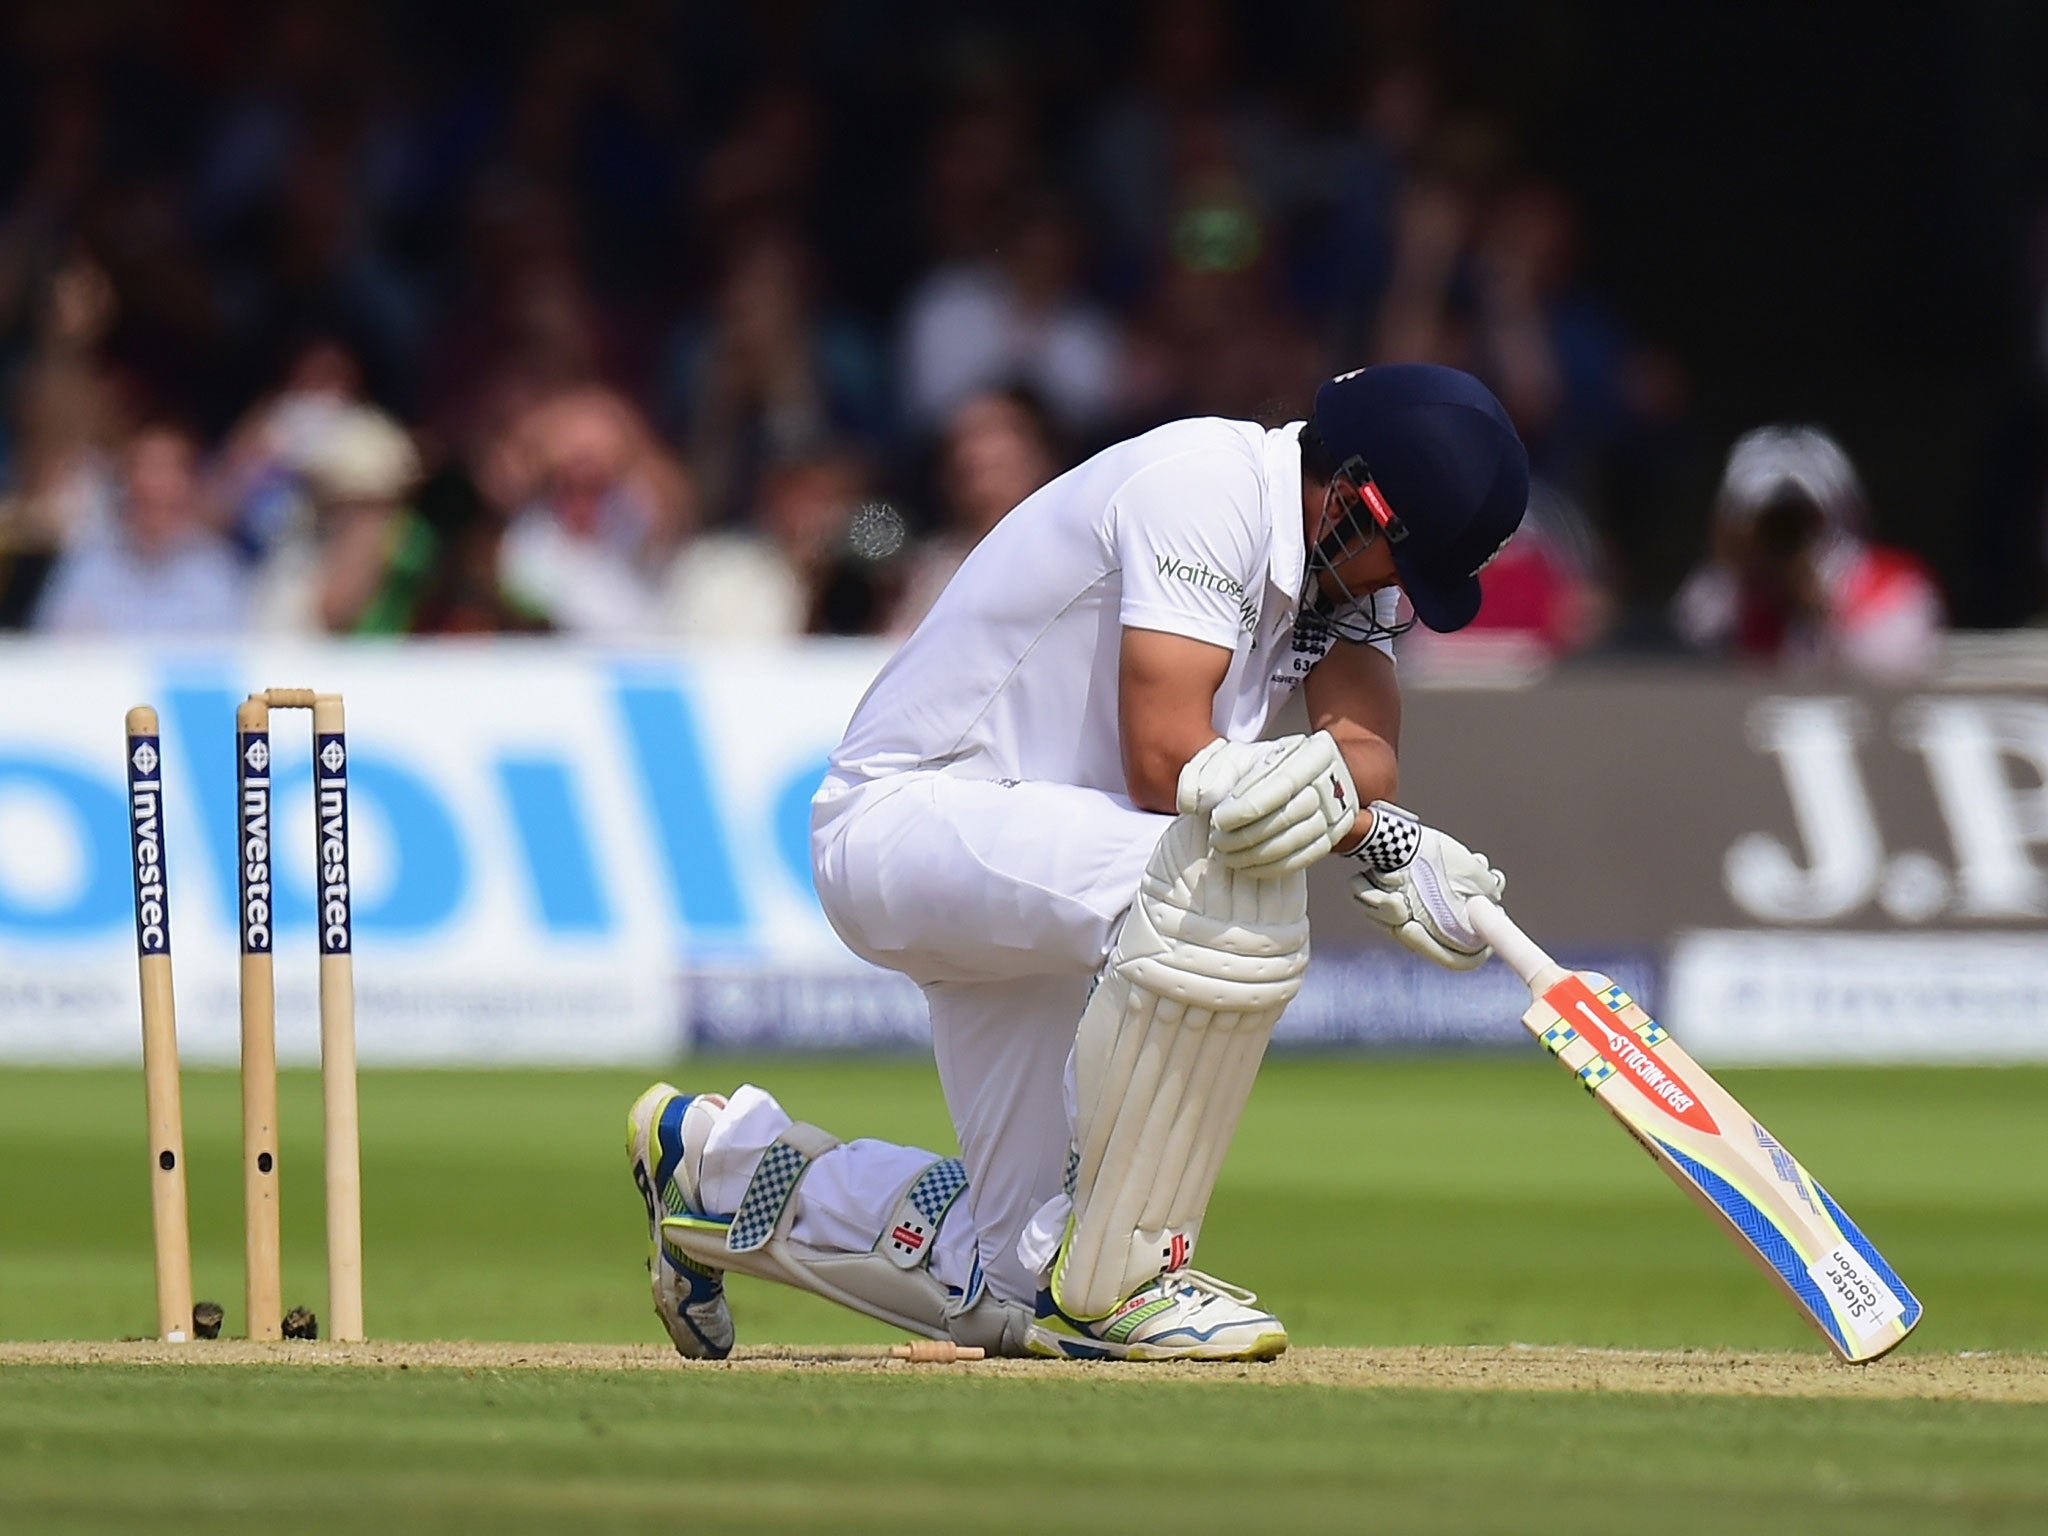 Alastair Cook is bowled by Mitchell Marsh